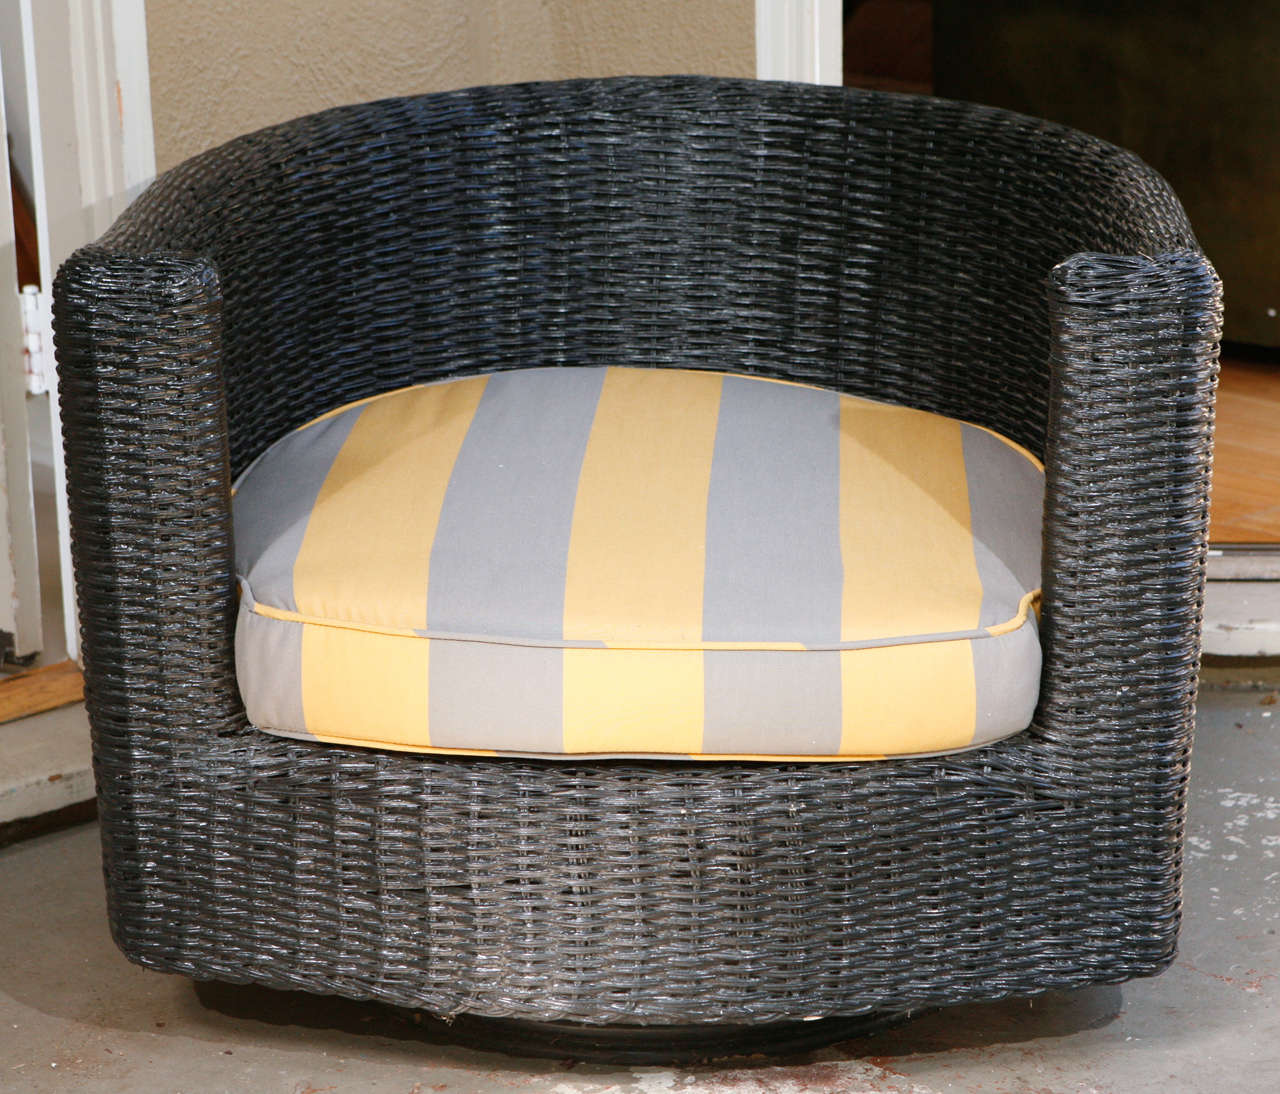 Featuring vintage grey and maize wide-striped upholstery, these bold and beautiful black rattan swivel chairs are one-of-a-kind beauties, perfect for a covered outdoor patio or even poolside.